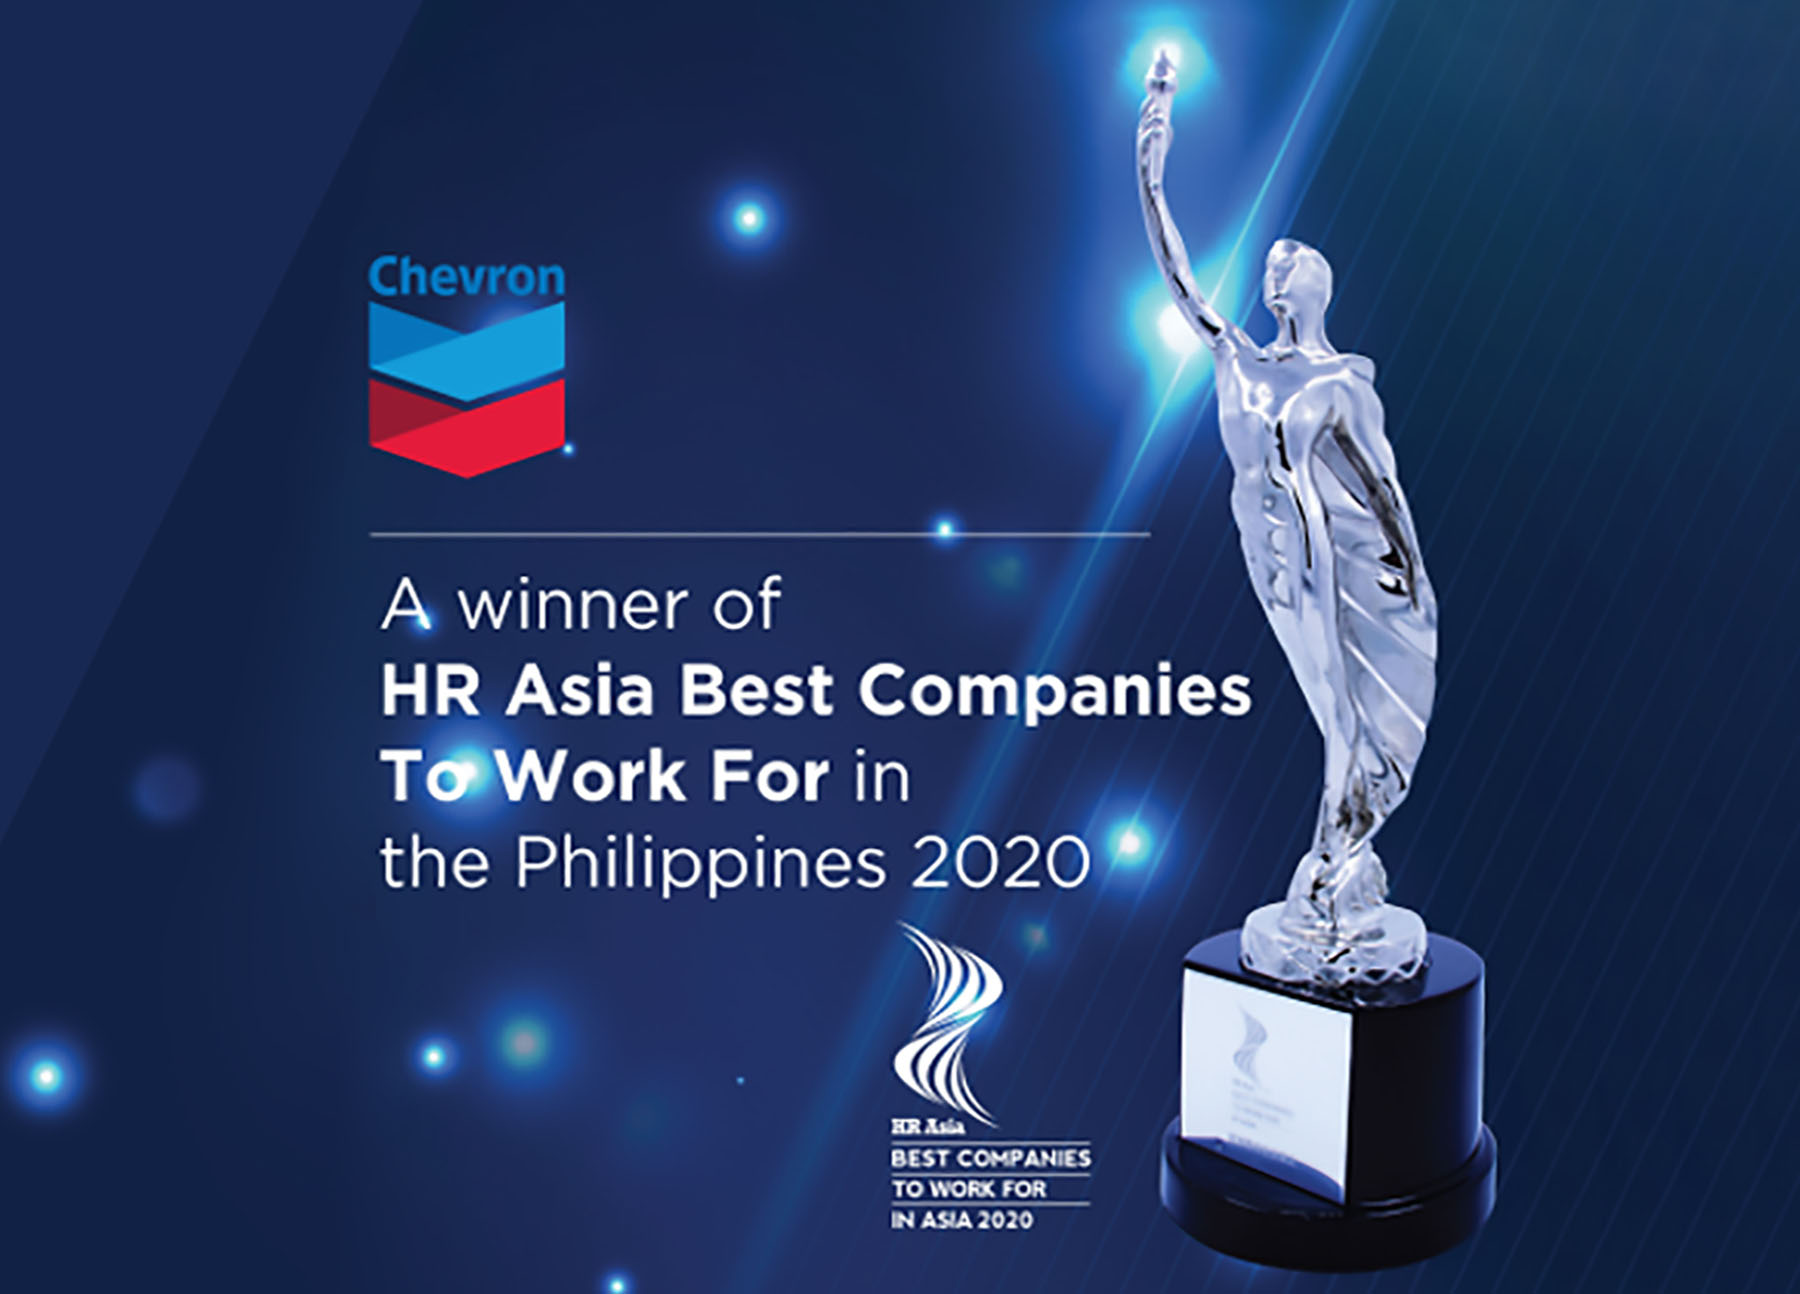 Chevron recognized among Asia’s best employers with double wins